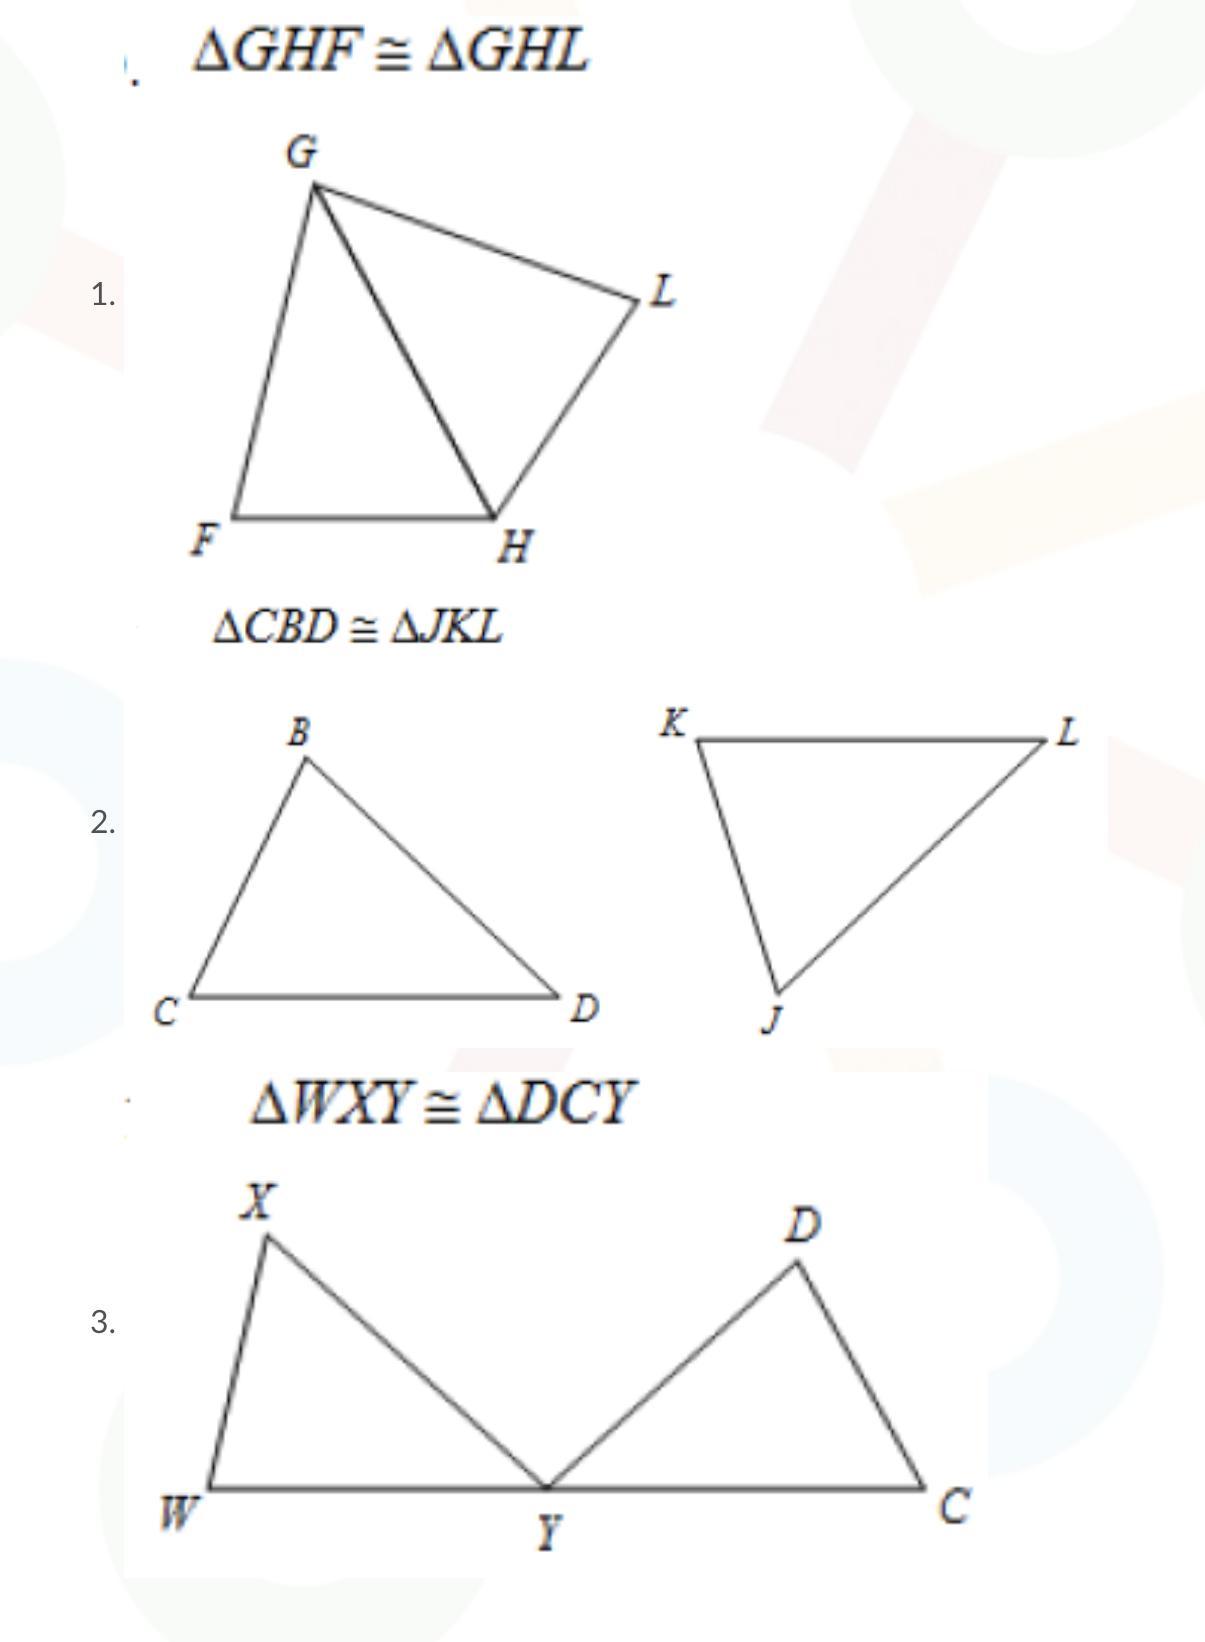 PLEASE HELP ME-Name The Angles And Sides Of Each Pair Of Triangles That Are Congruent.